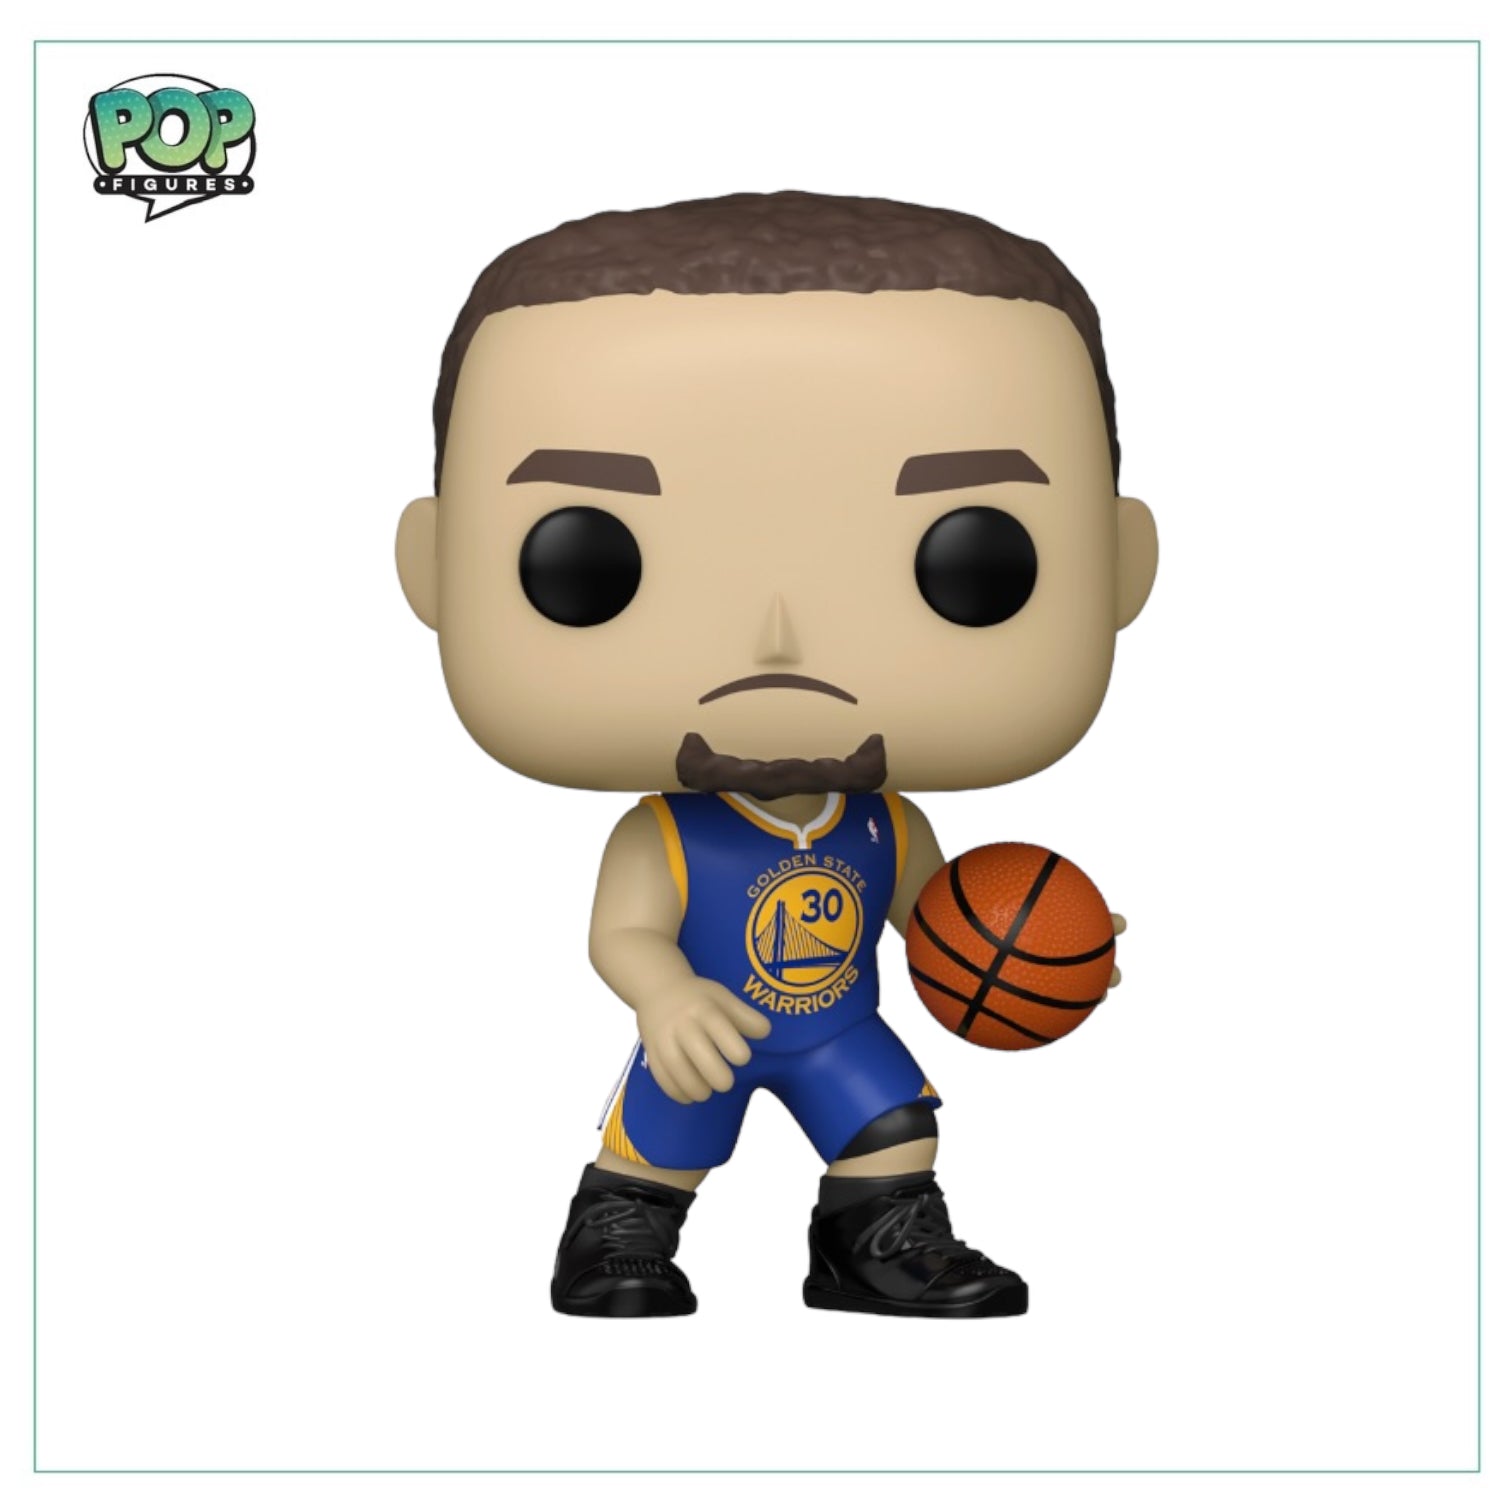 Stephen Curry #19 Trading Cards Funko Pop! - Golden State Warriors - NBA